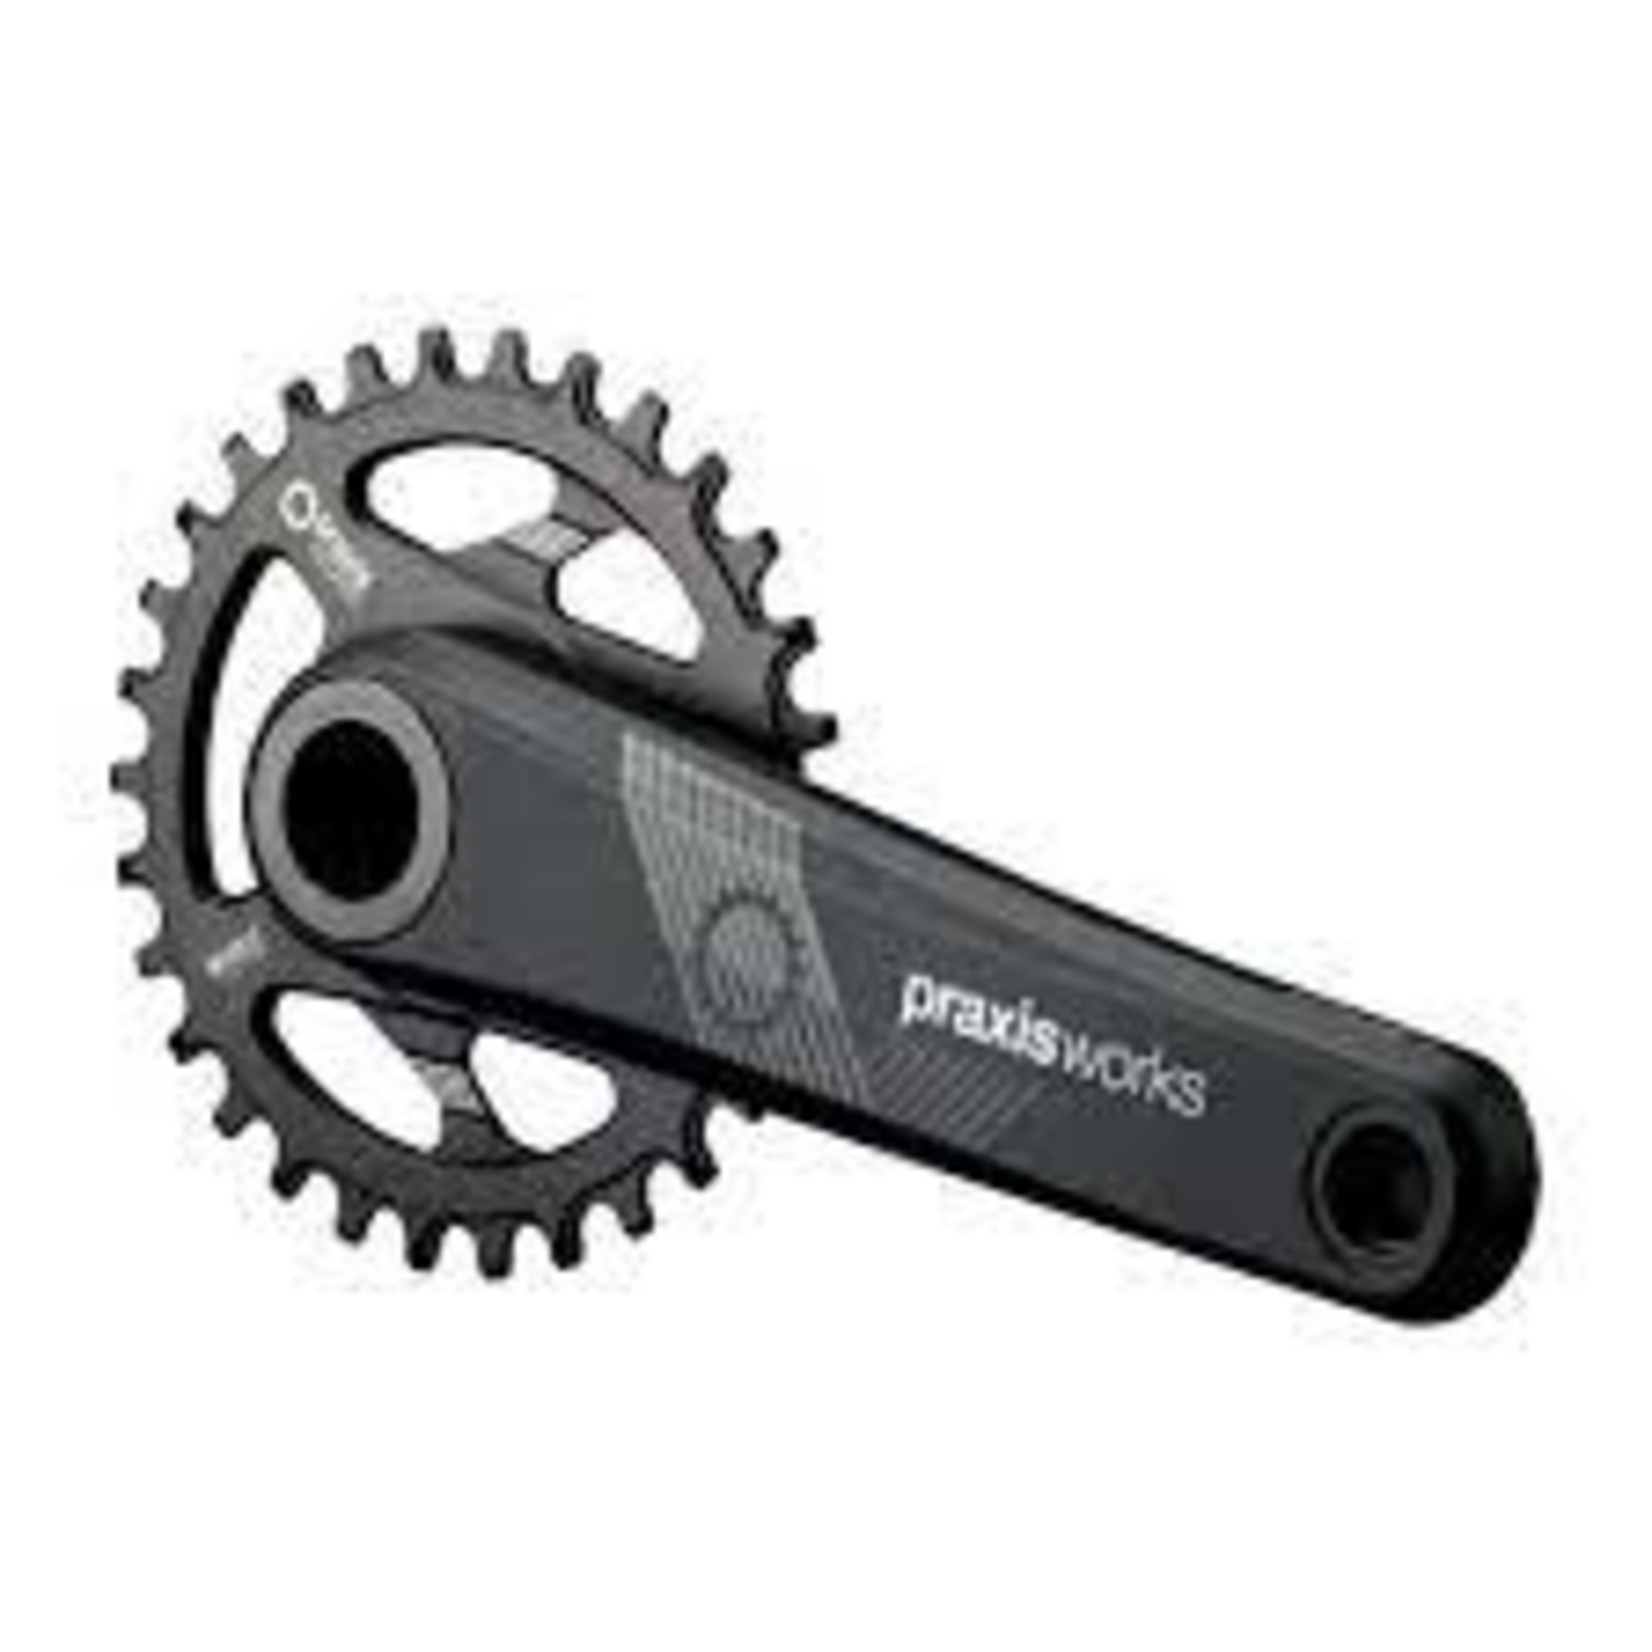 Praxis Works Crankset Praxis Cadet 24mm spindle 30T Chainring